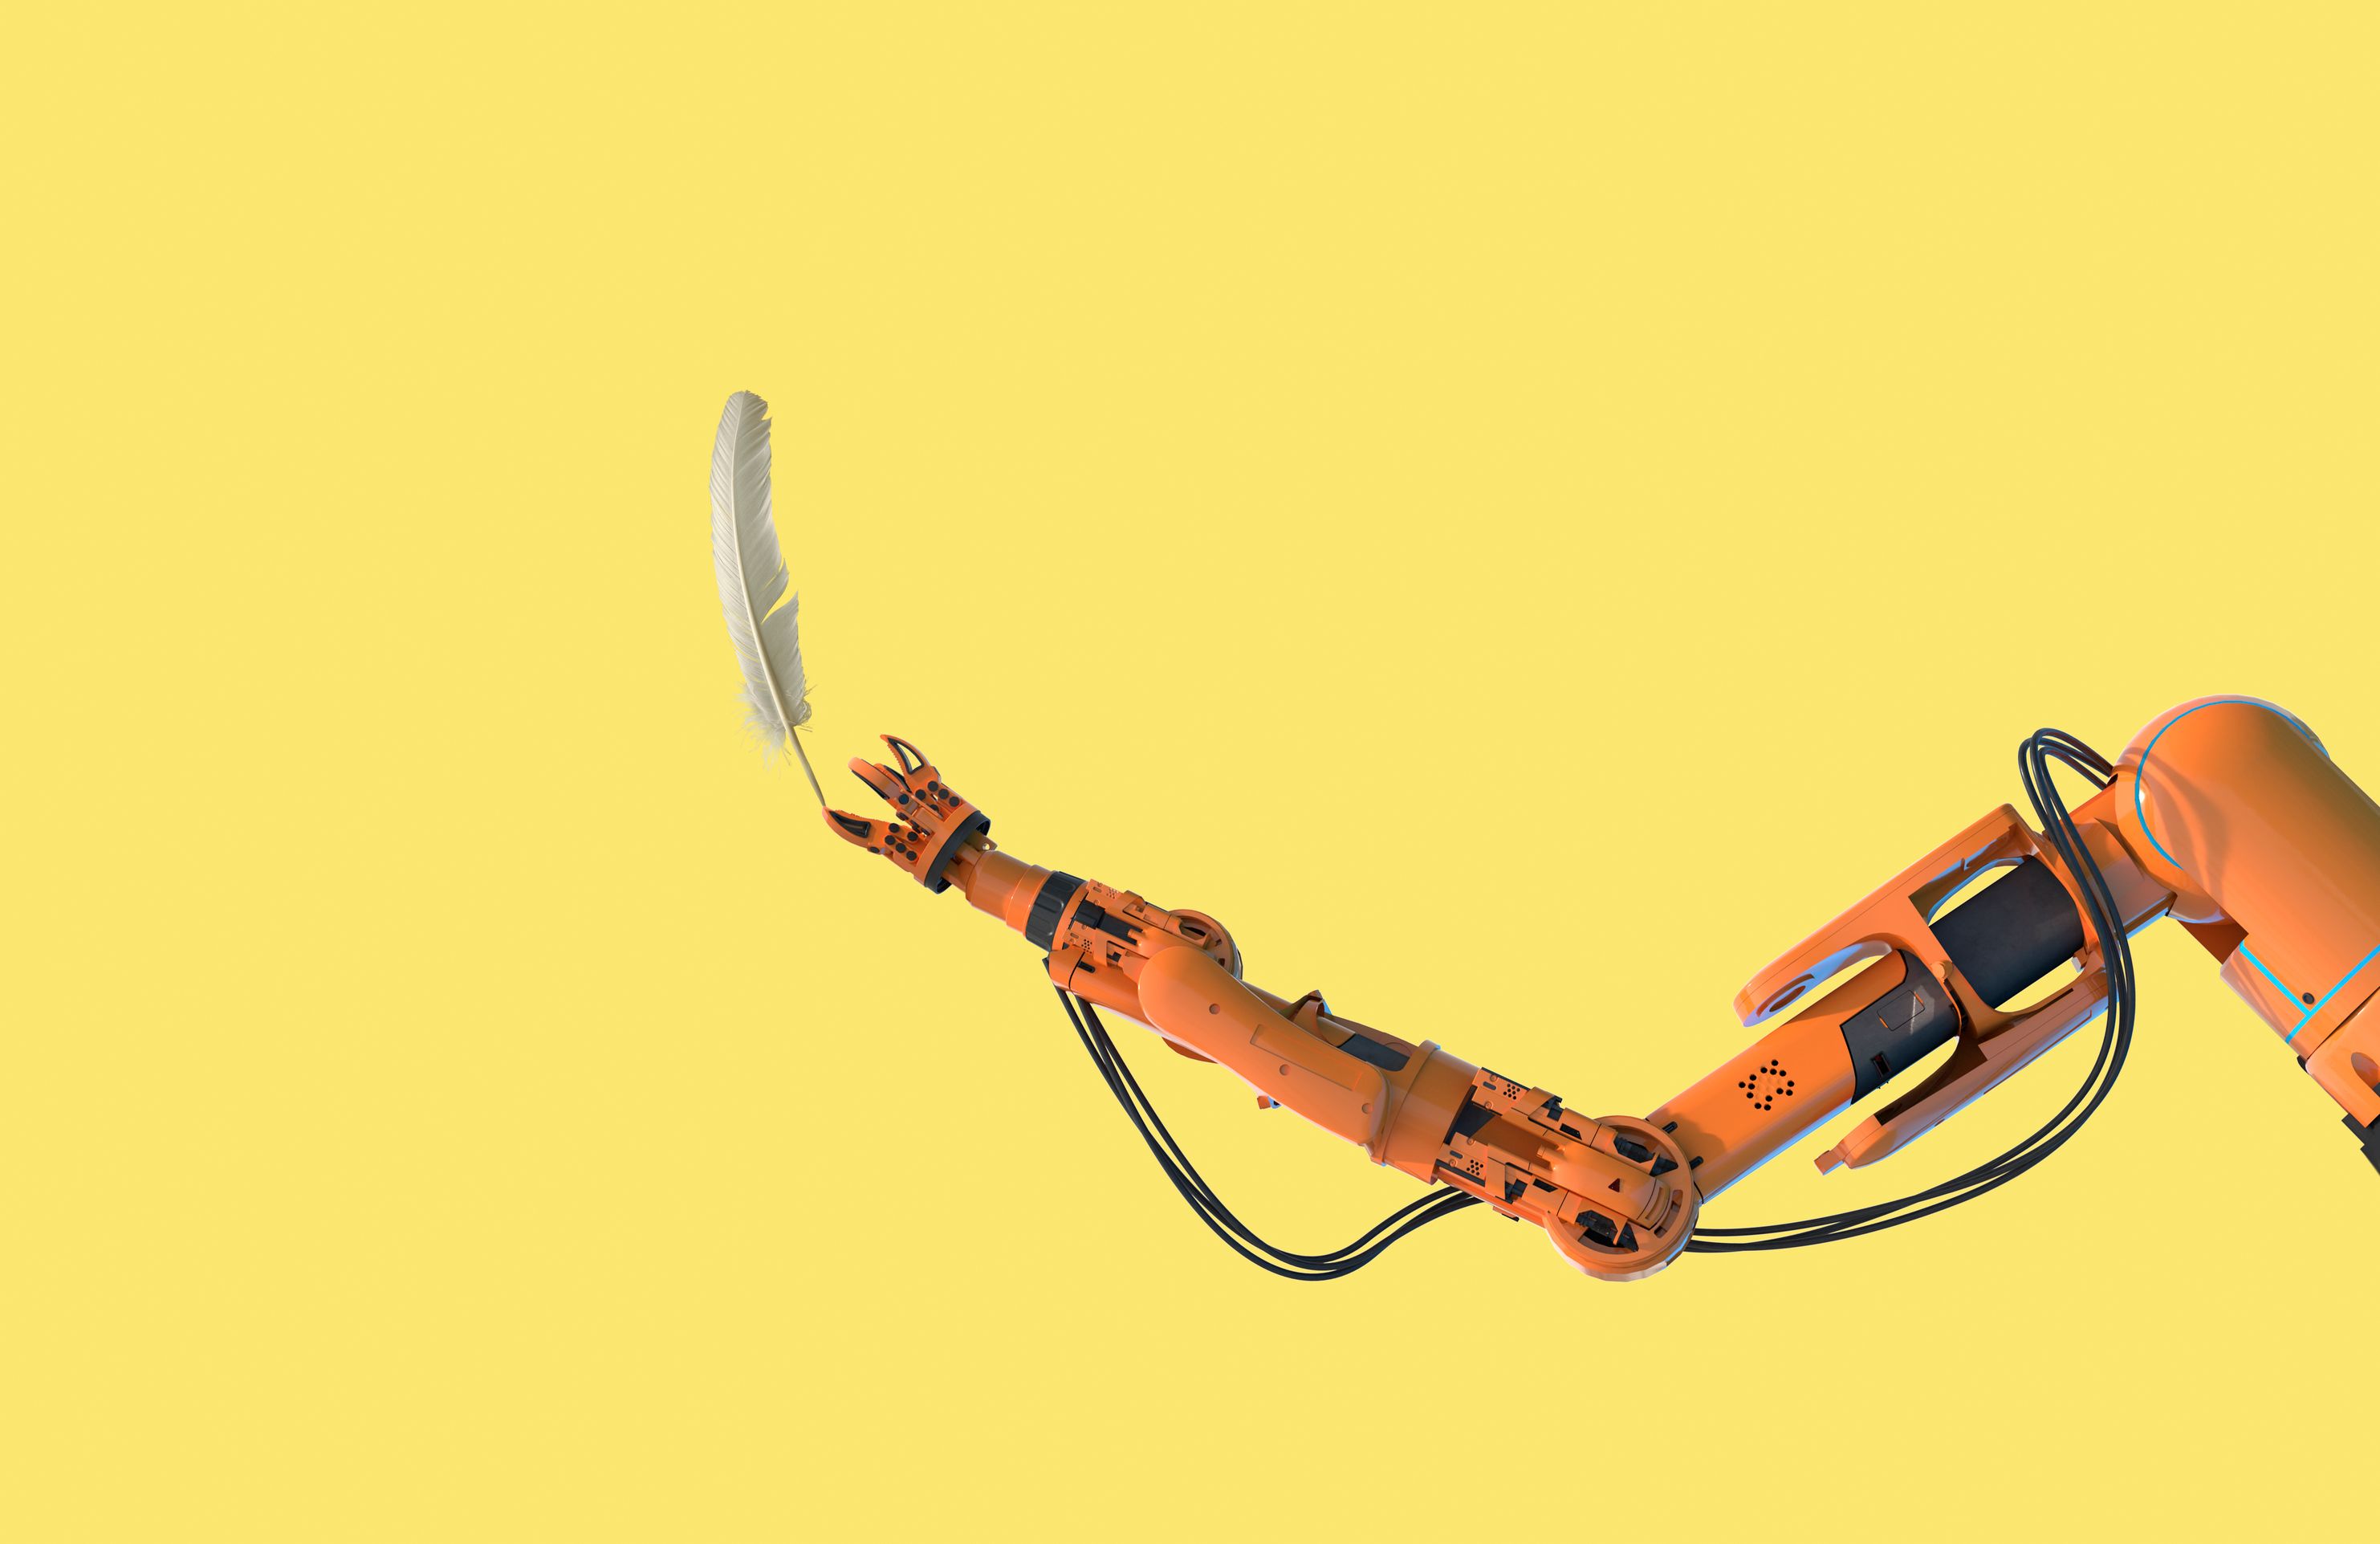 An orange robotic arm holding a feather on a yellow background. 